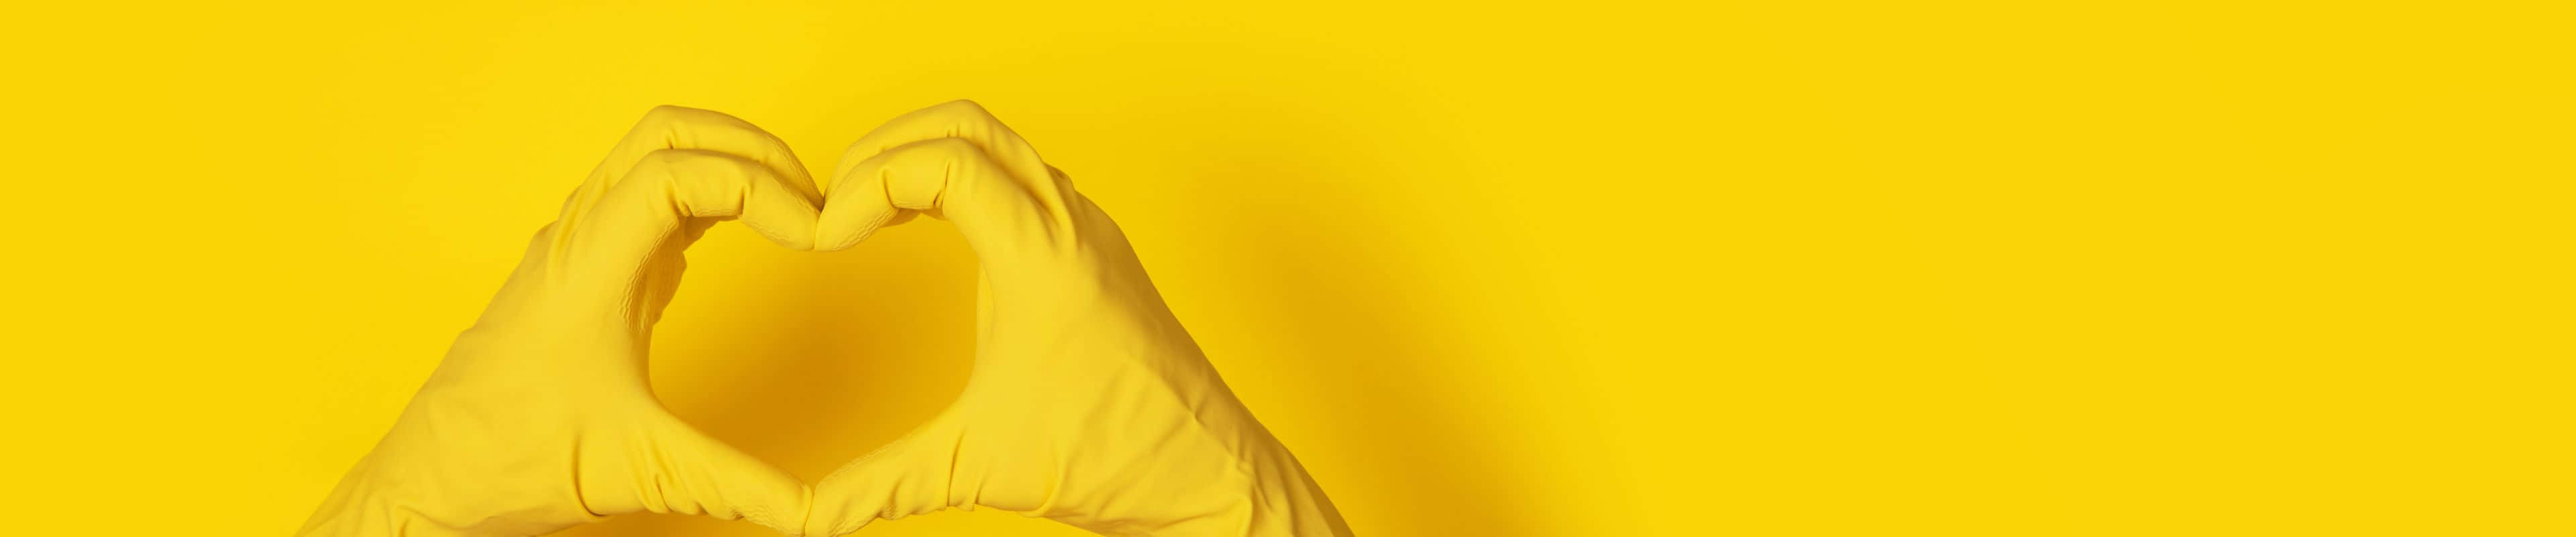 A Pair Of Yellow Gloves On A Yellow Background Wallpaper